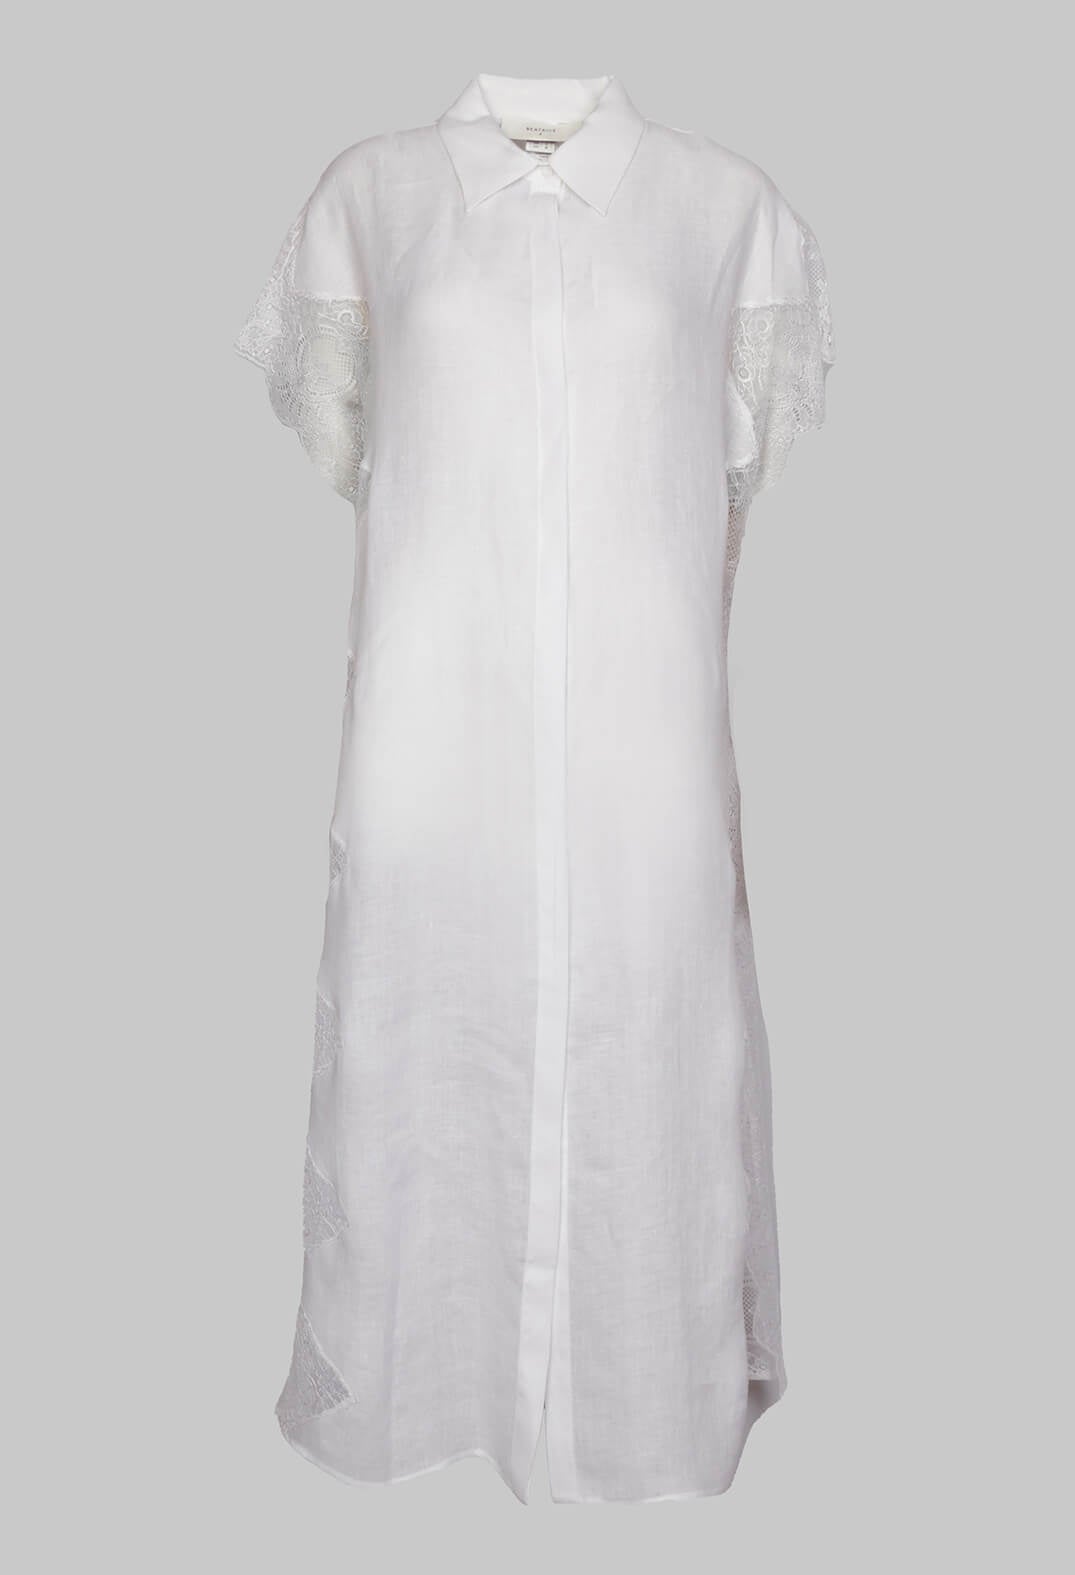 Beatrice B Shirt dress in white with lace detail